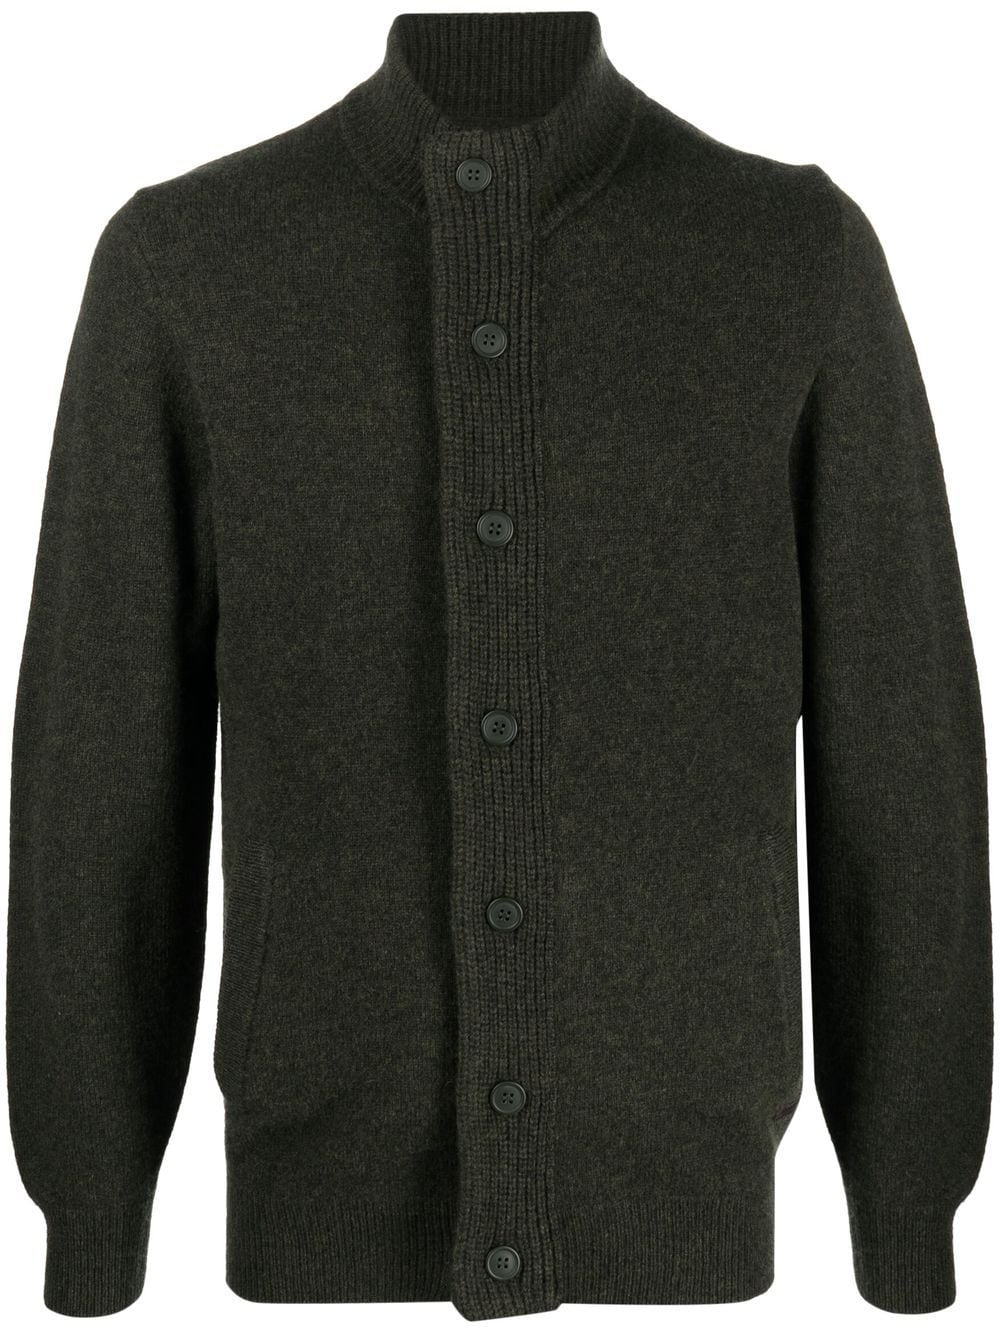 Barbour button-front knitted jumper - Green von Barbour